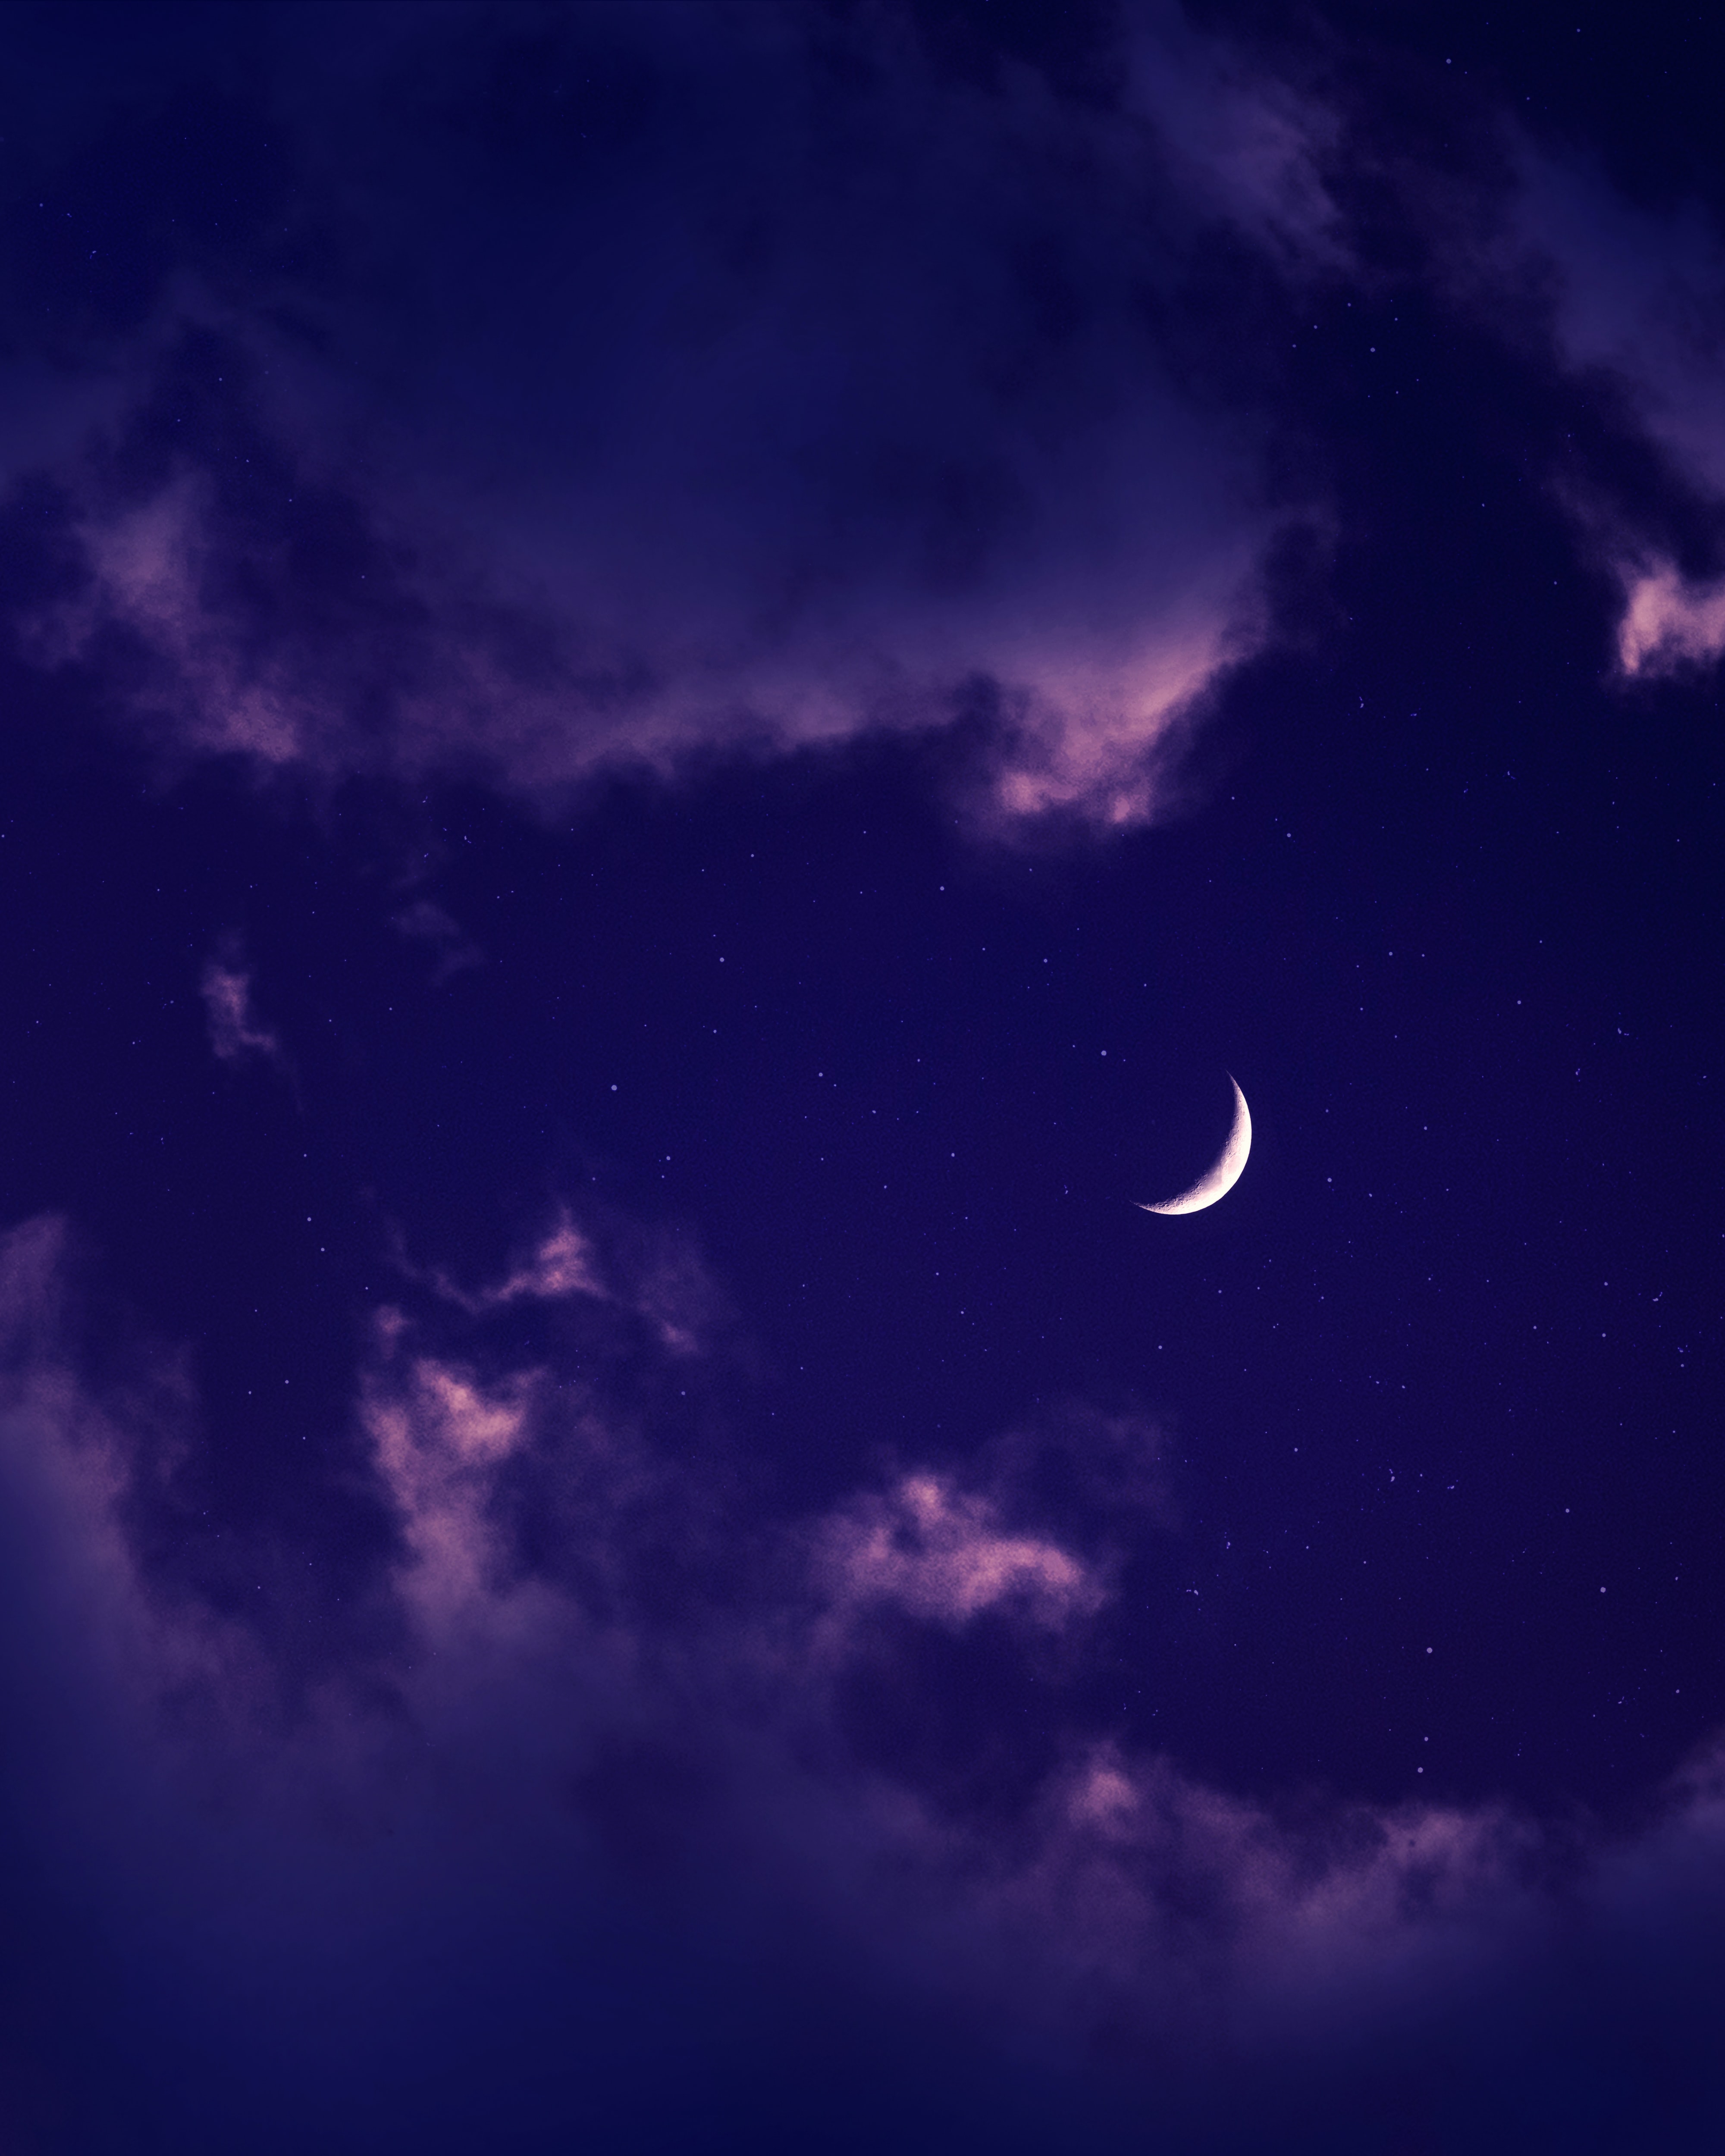 99360 download wallpaper purple, stars, night, clouds, moon, violet, dark screensavers and pictures for free